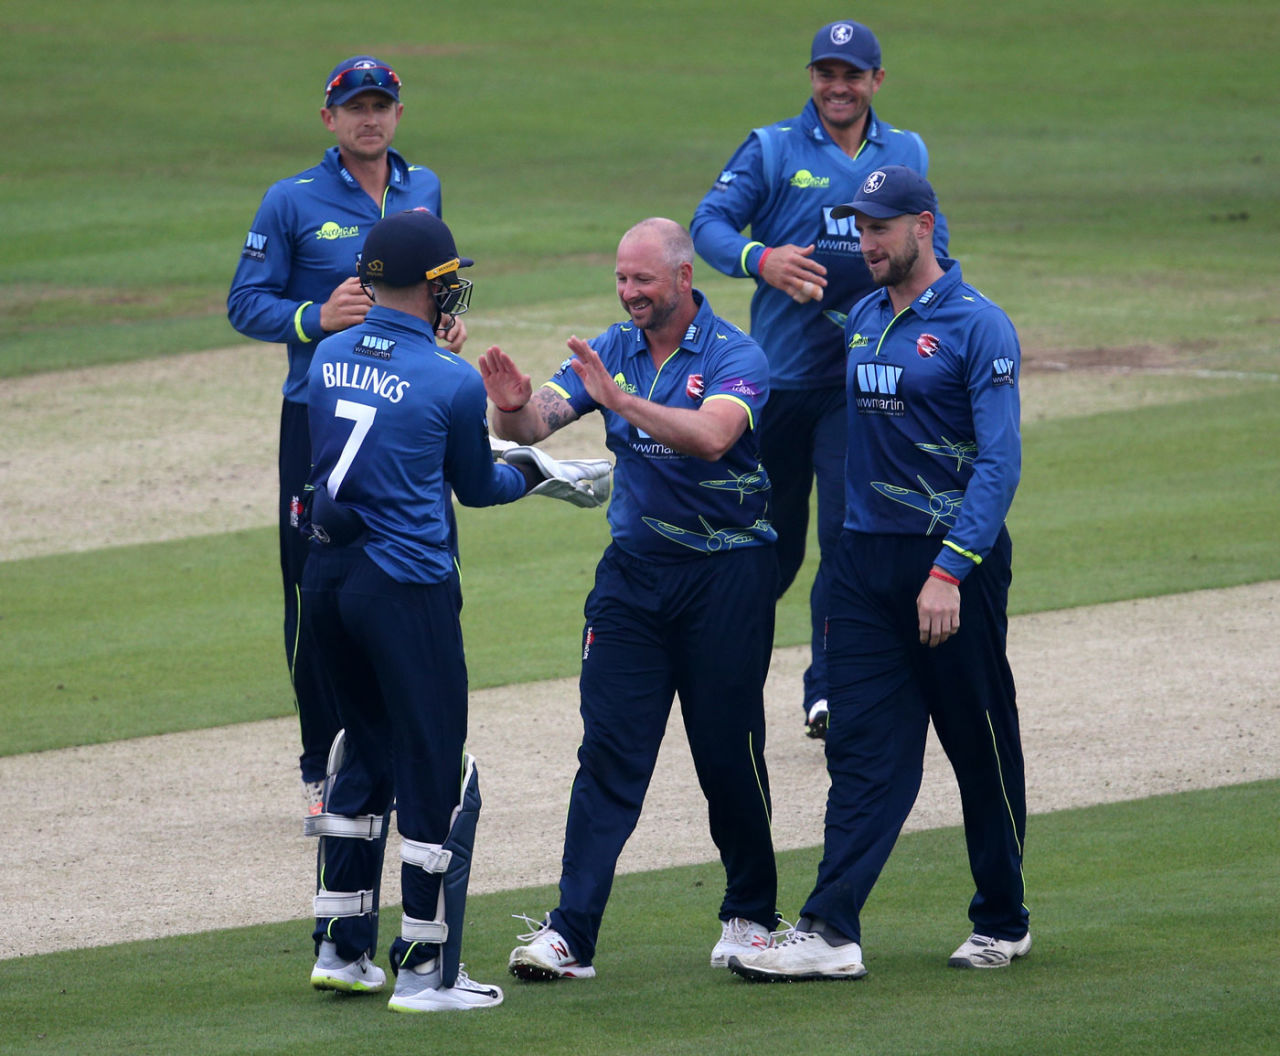 Darren Stevens was on the mark straight away, Kent v Somerset, Royal London Cup, Canterbury, May 29, 2018